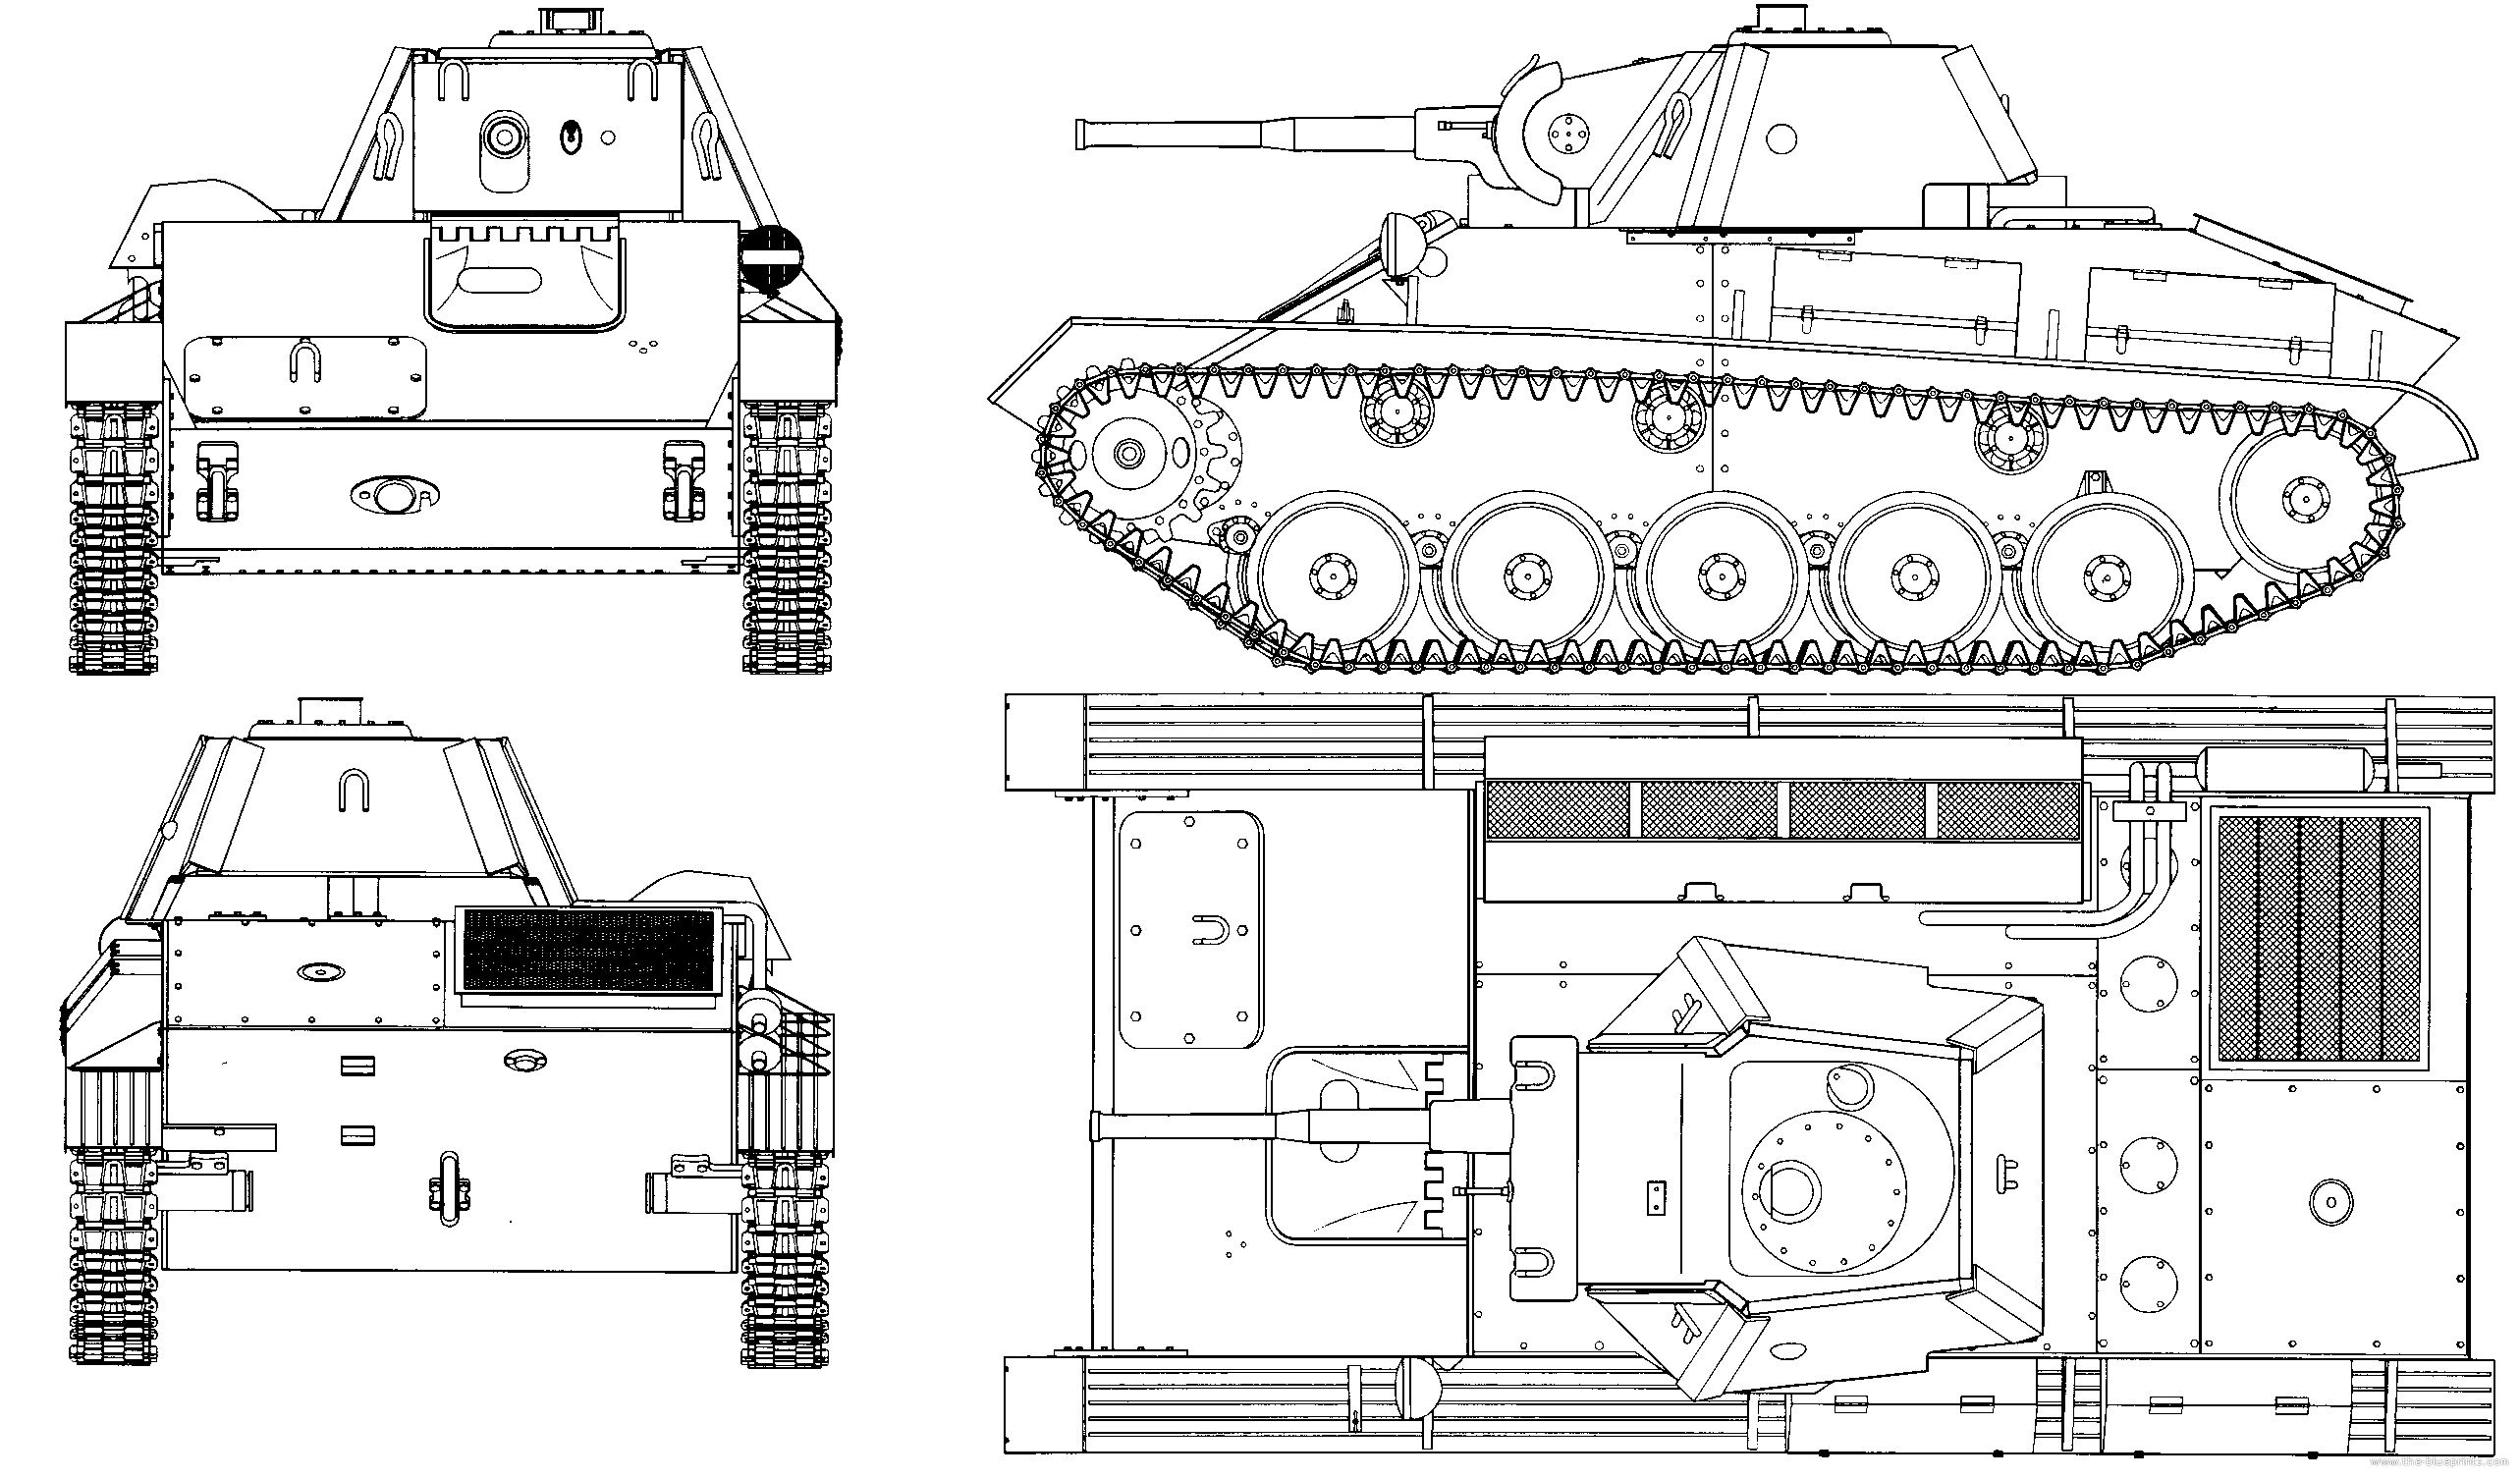 A T-70 technical drawing